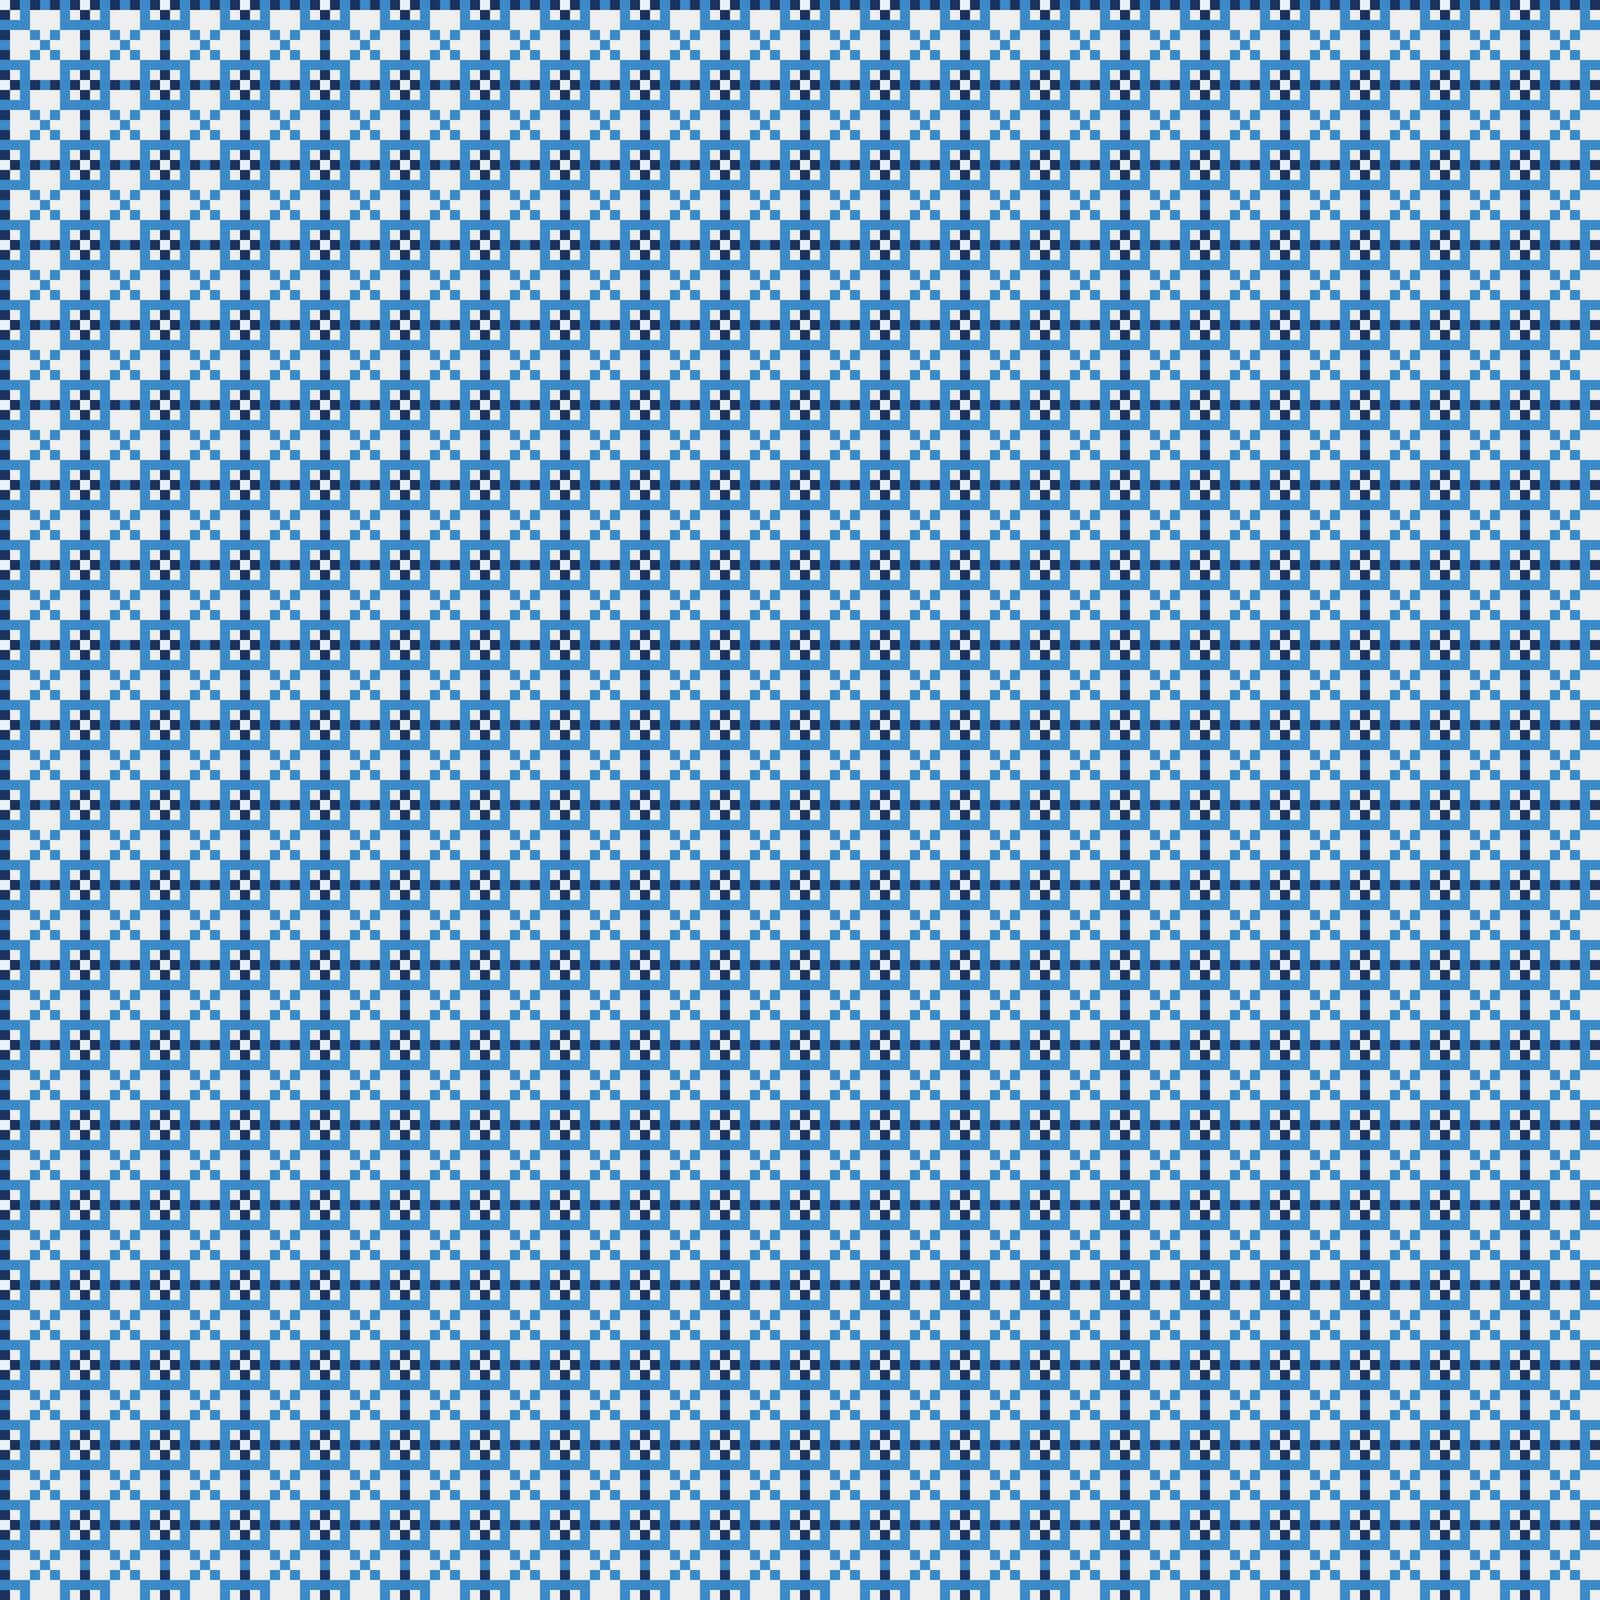 Abstract Cross-Pattern Dotted generative computational art illustration by aslyva